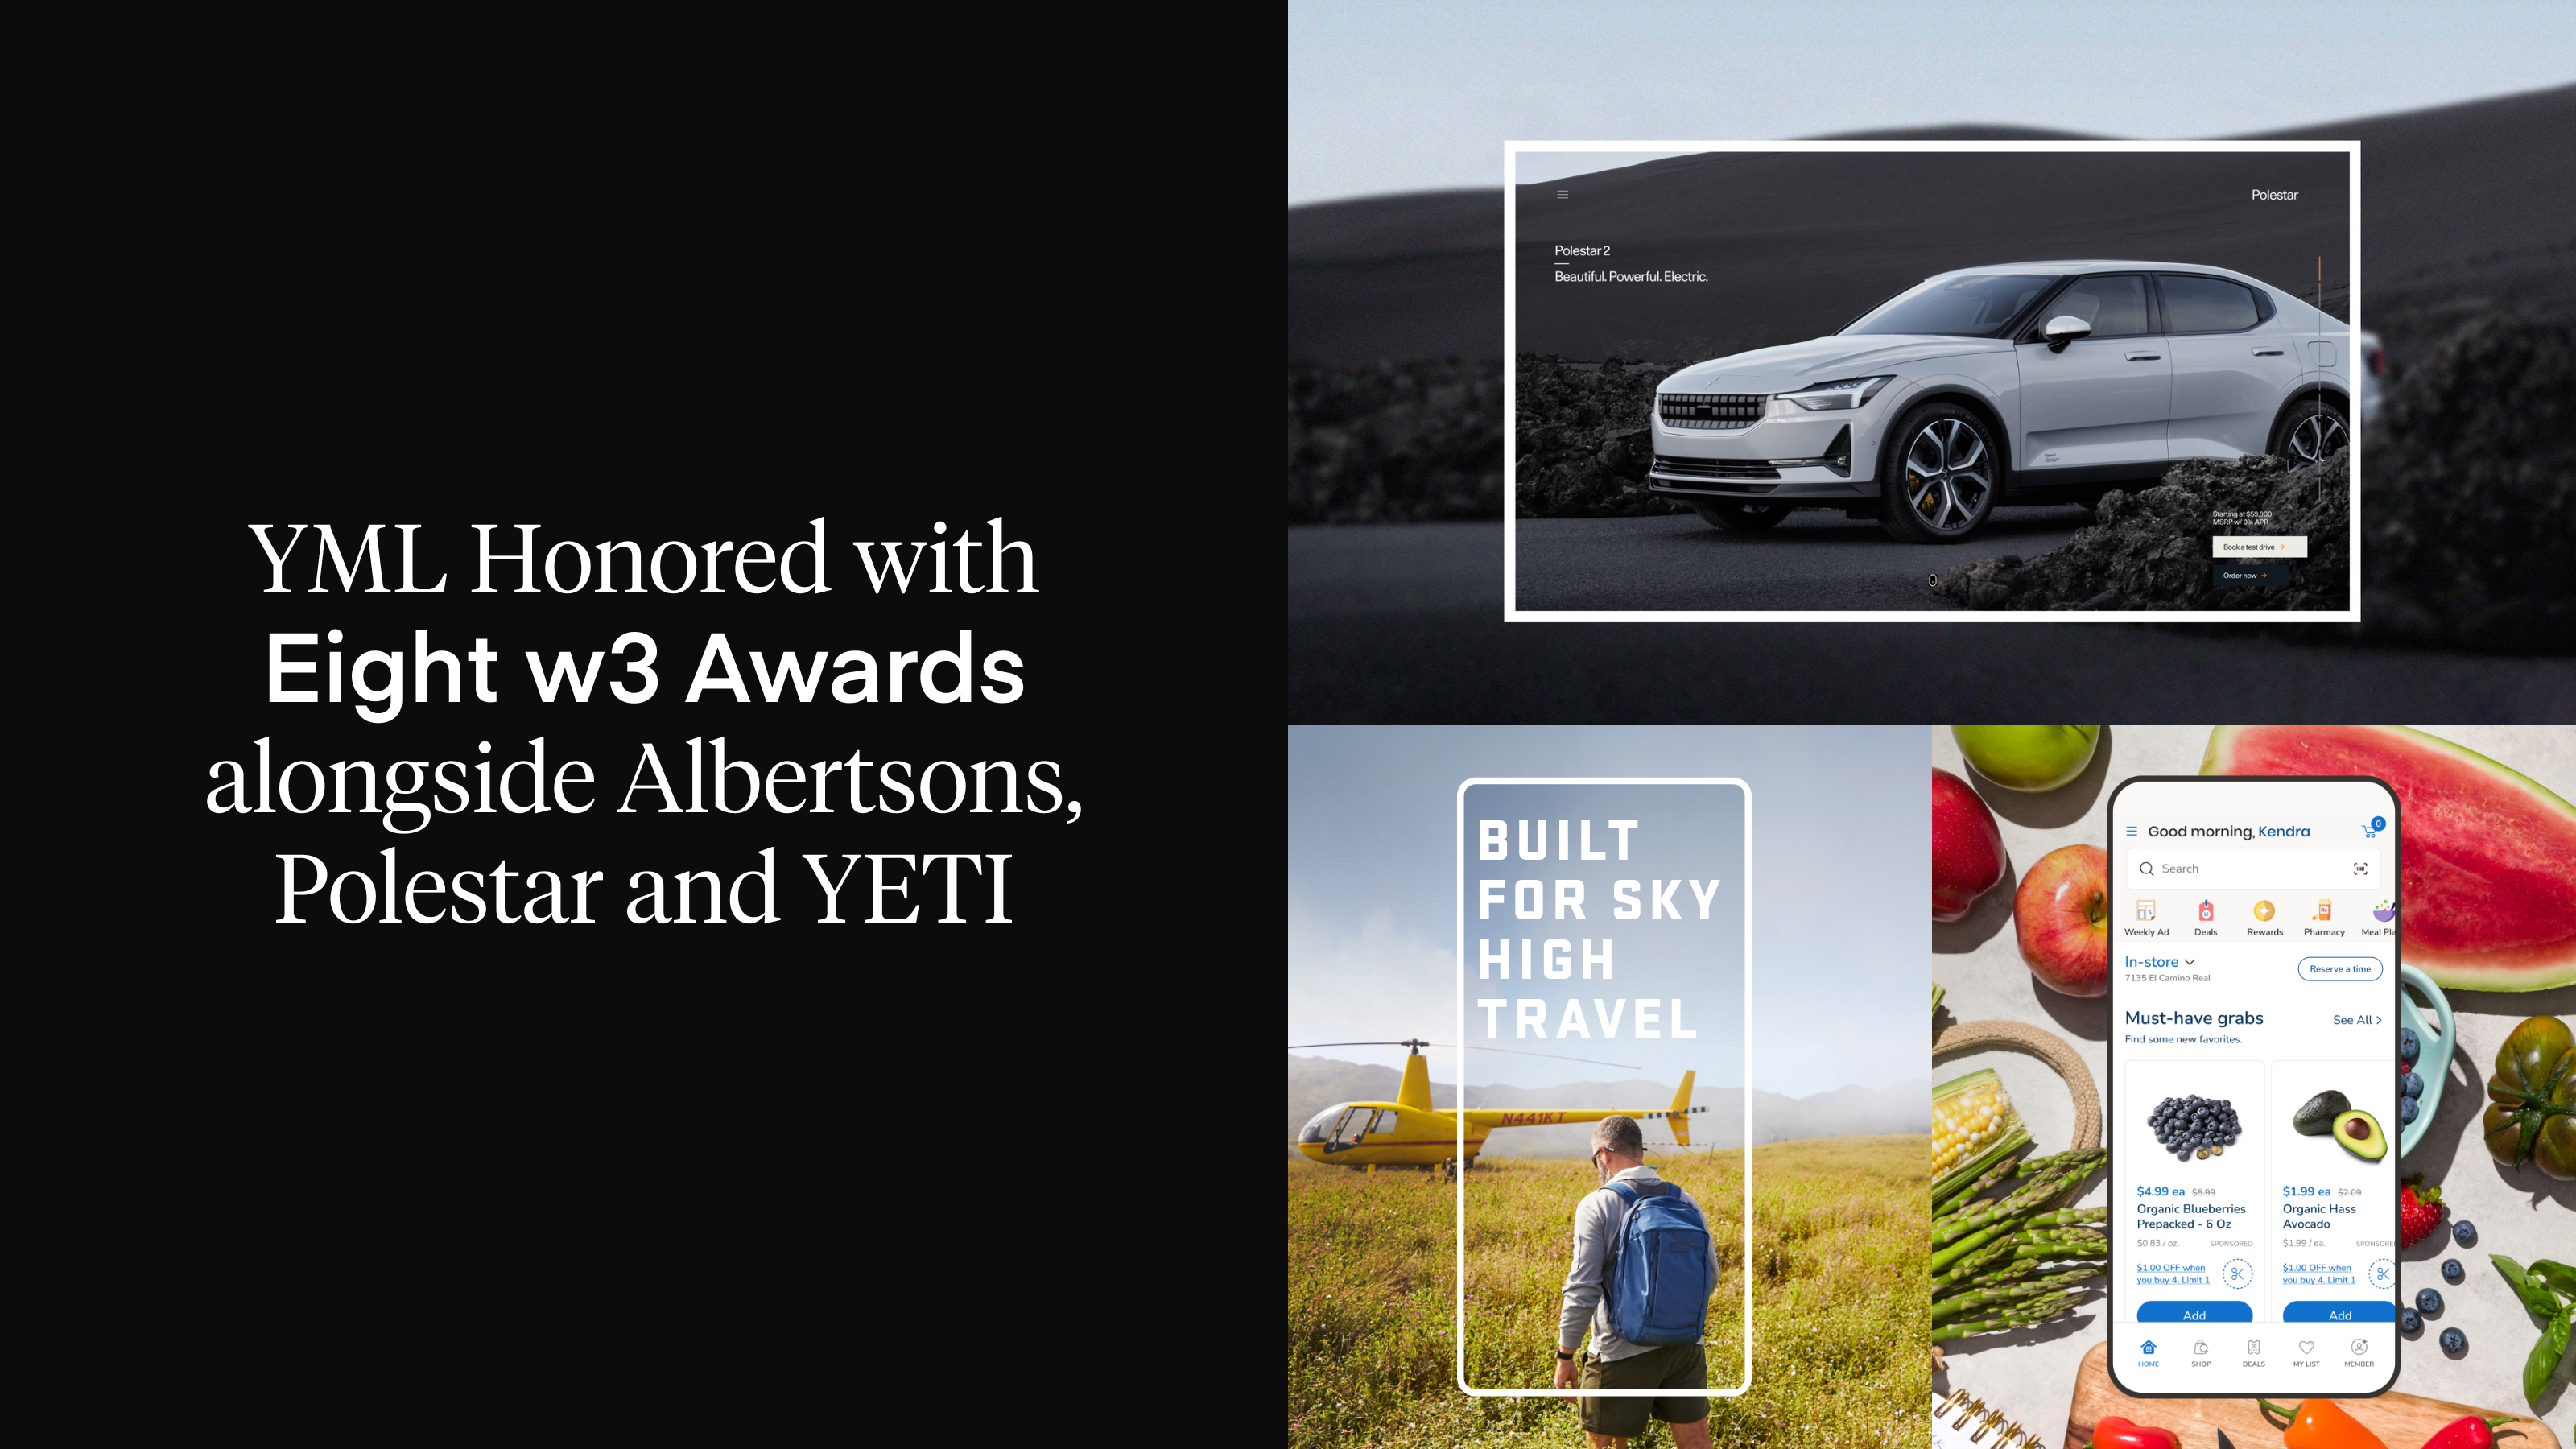 YML Honored with Eight w3 Awards for Work with Albertsons